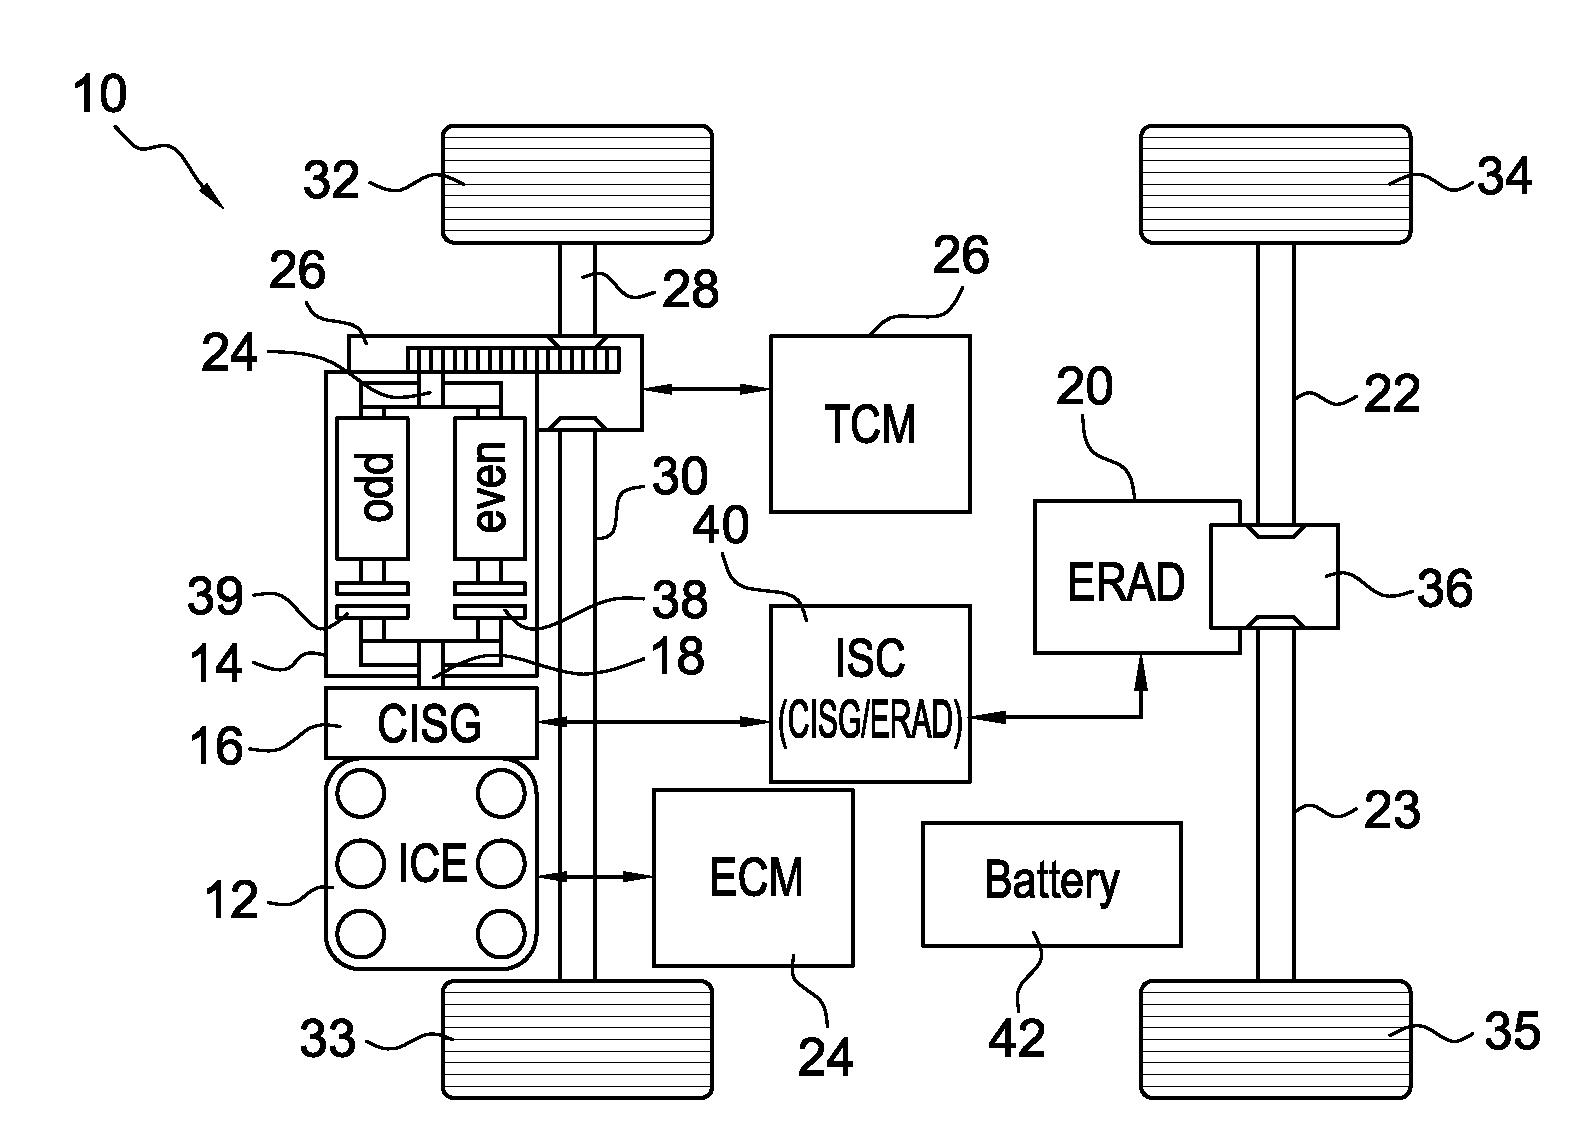 Idle Speed Control of a Hybrid Electric Vehicle